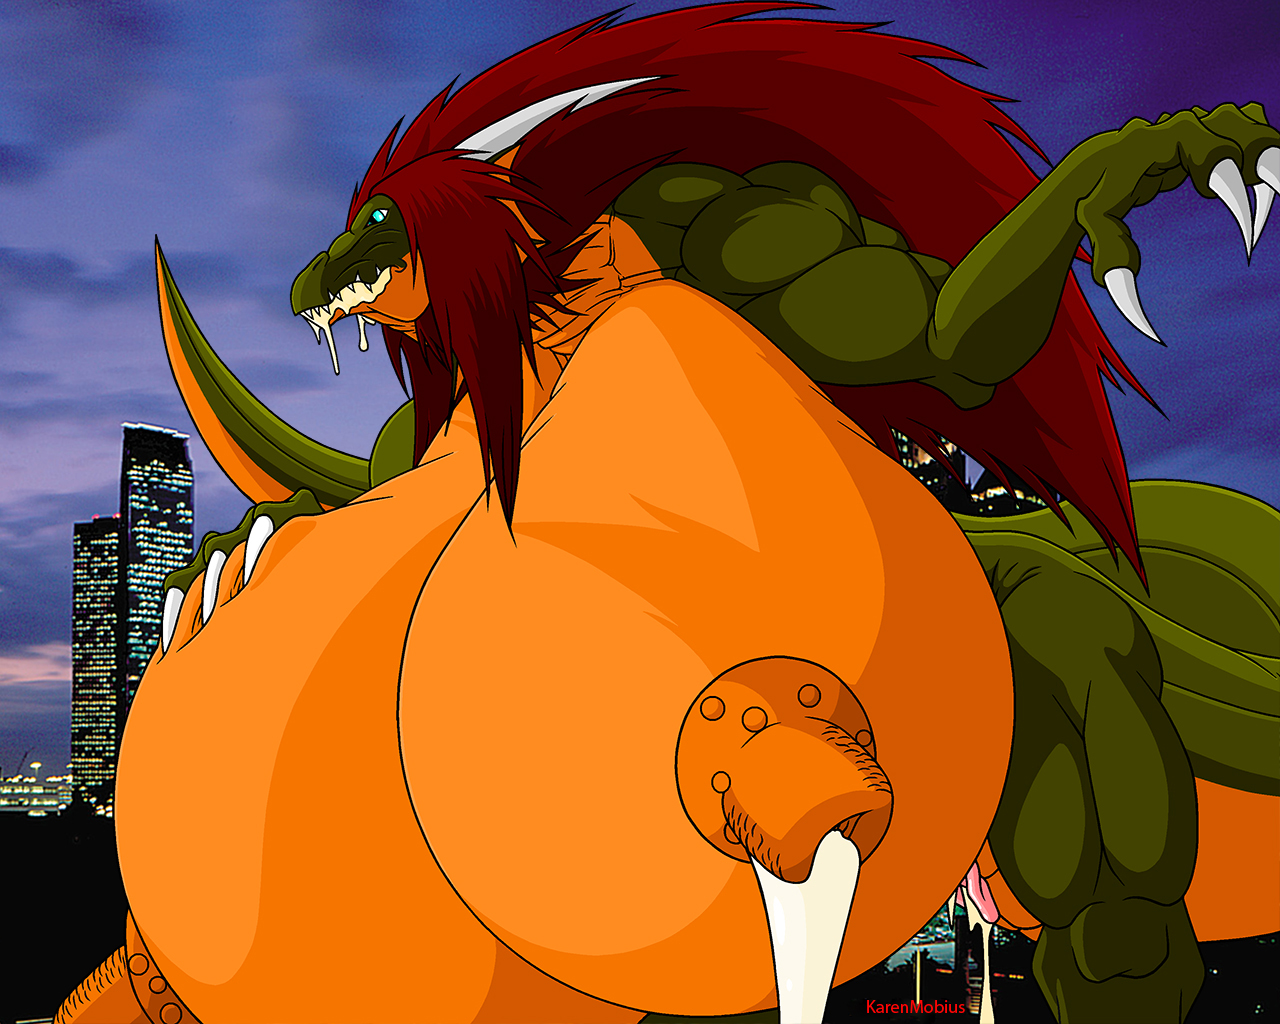 One Horny and massive Saurian